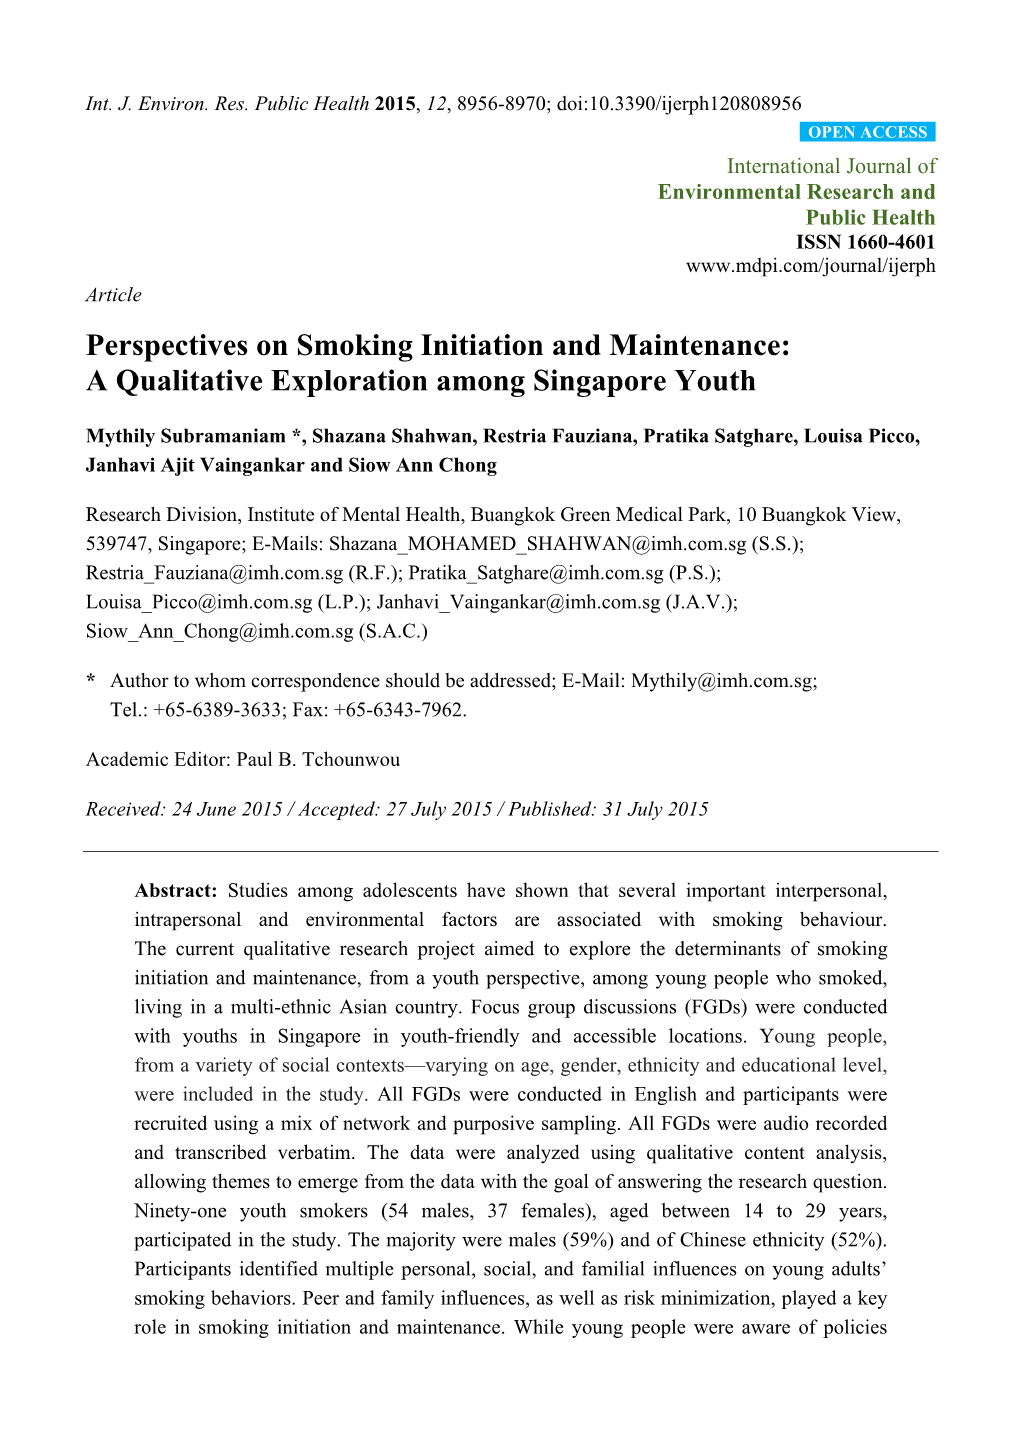 Perspectives on Smoking Initiation and Maintenance: a Qualitative Exploration Among Singapore Youth